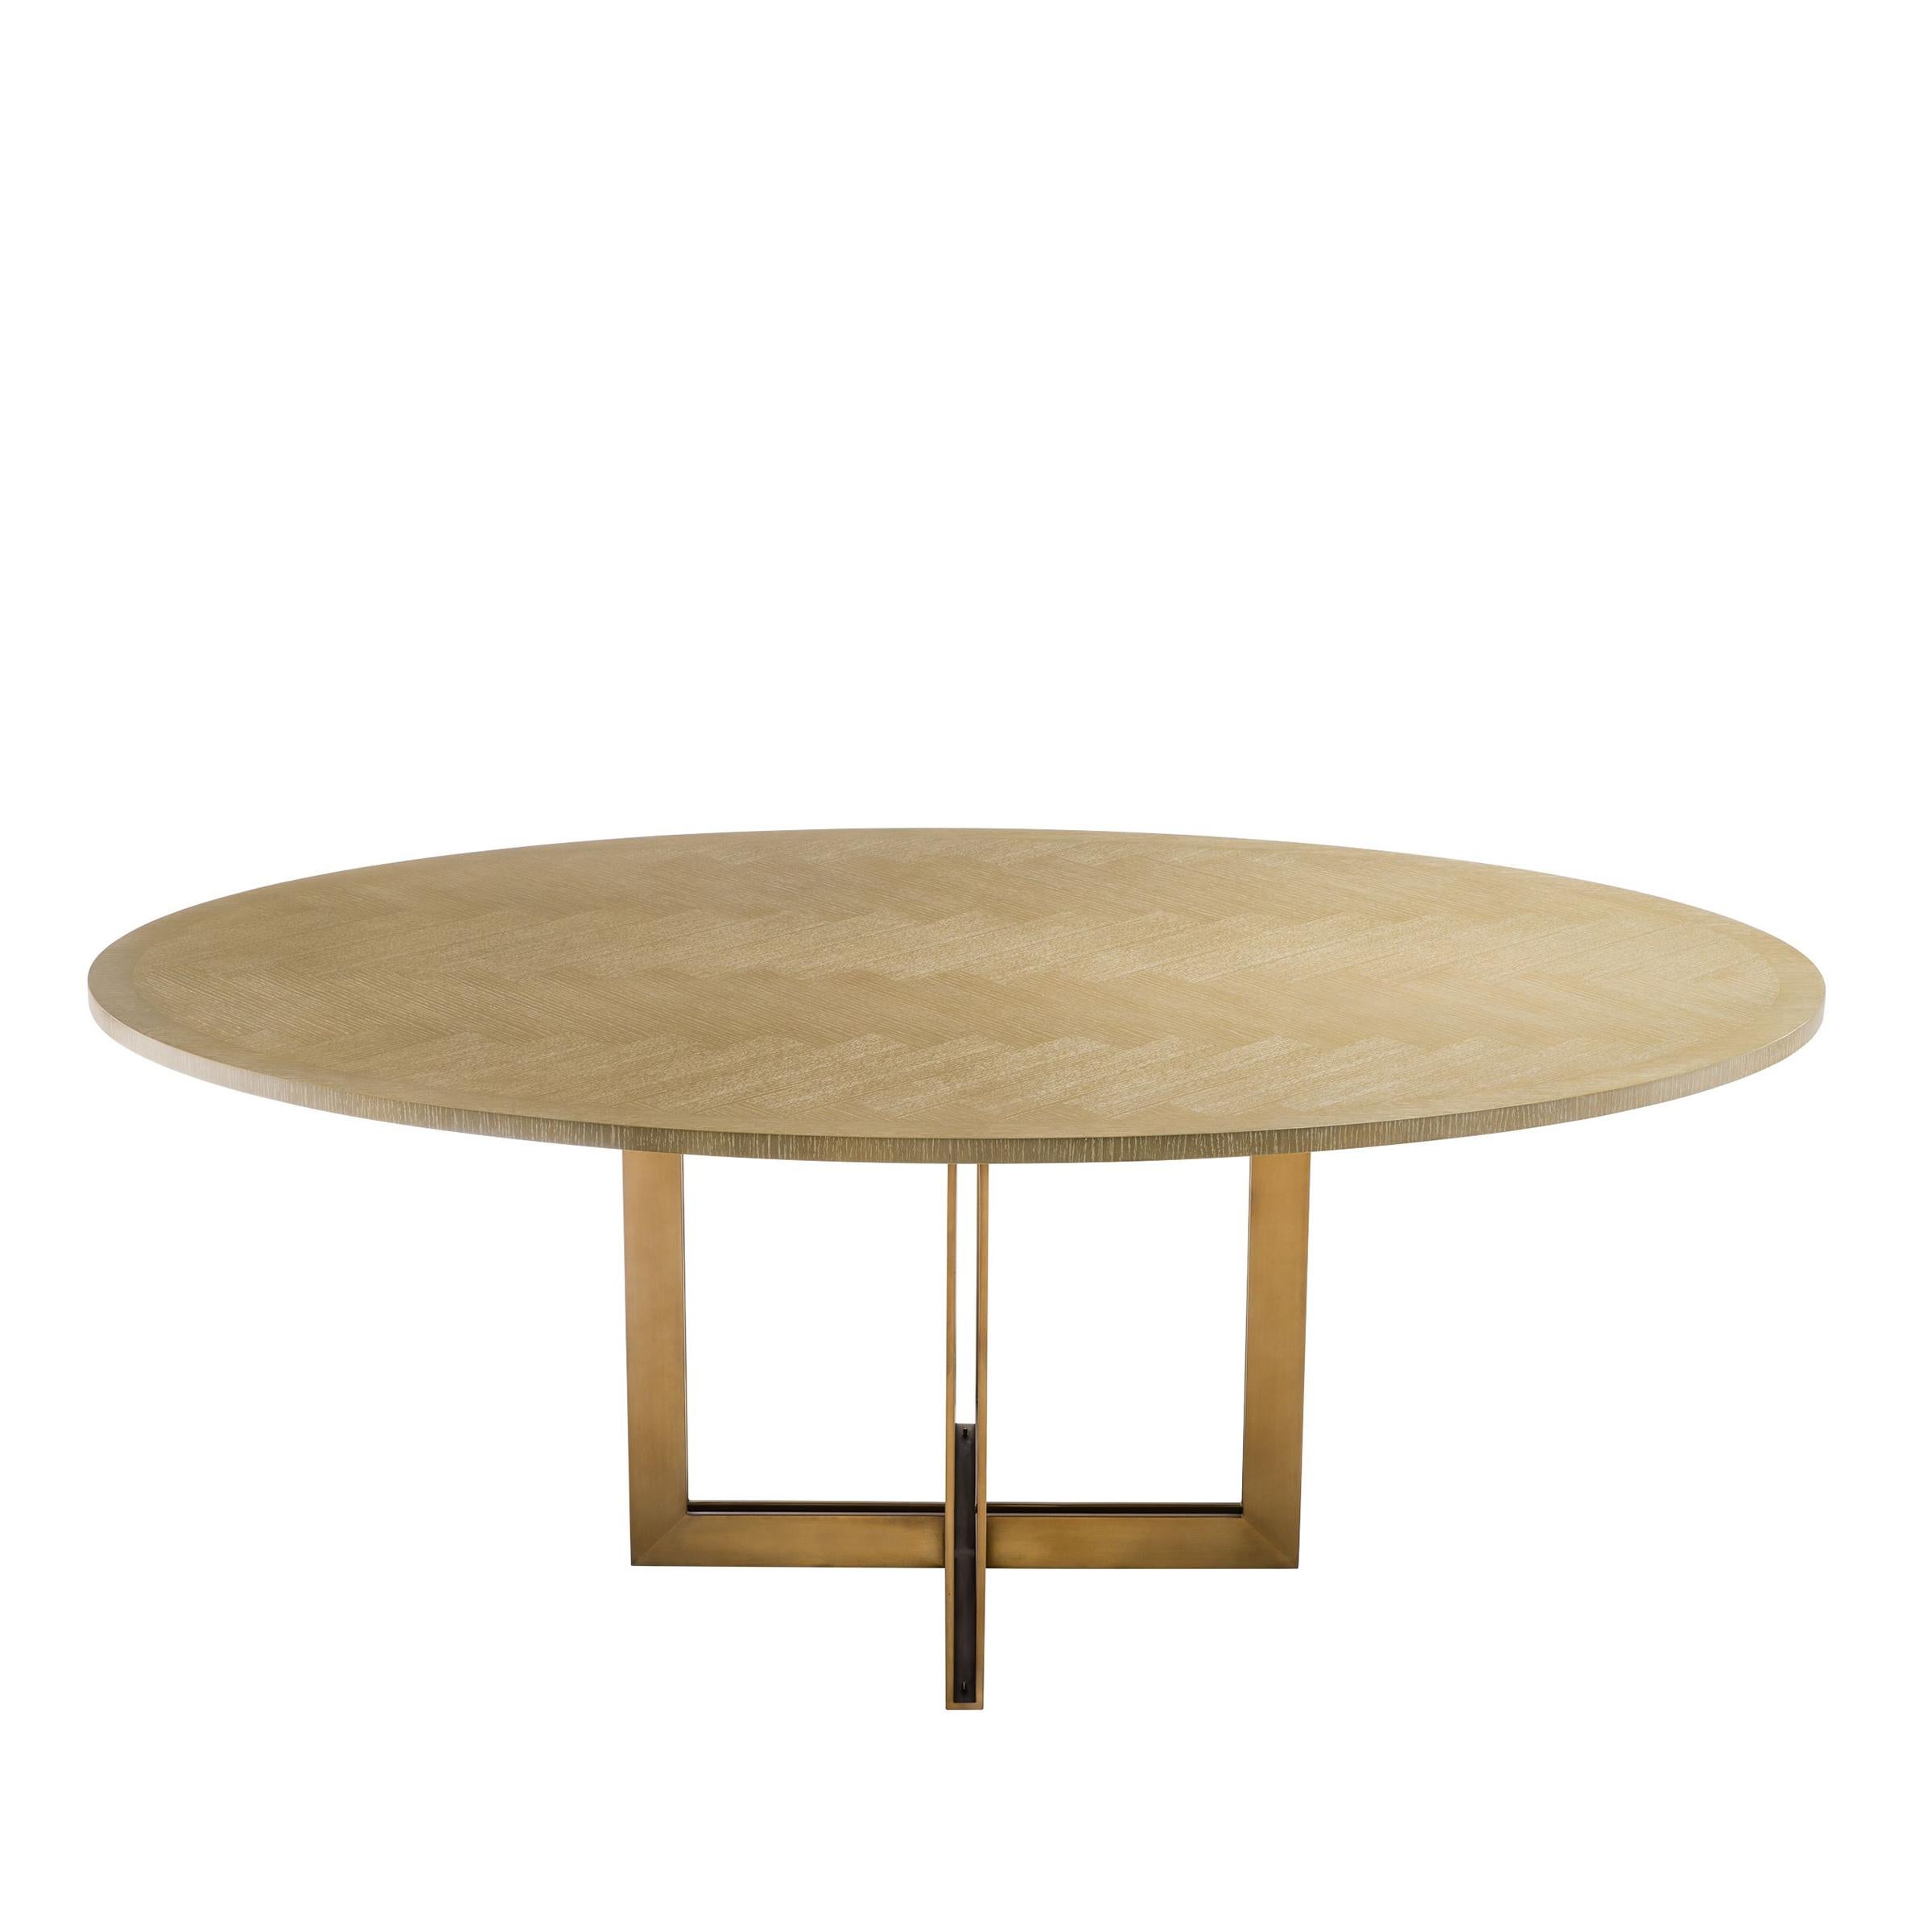 Hand-Crafted Brass Oval Dining Table